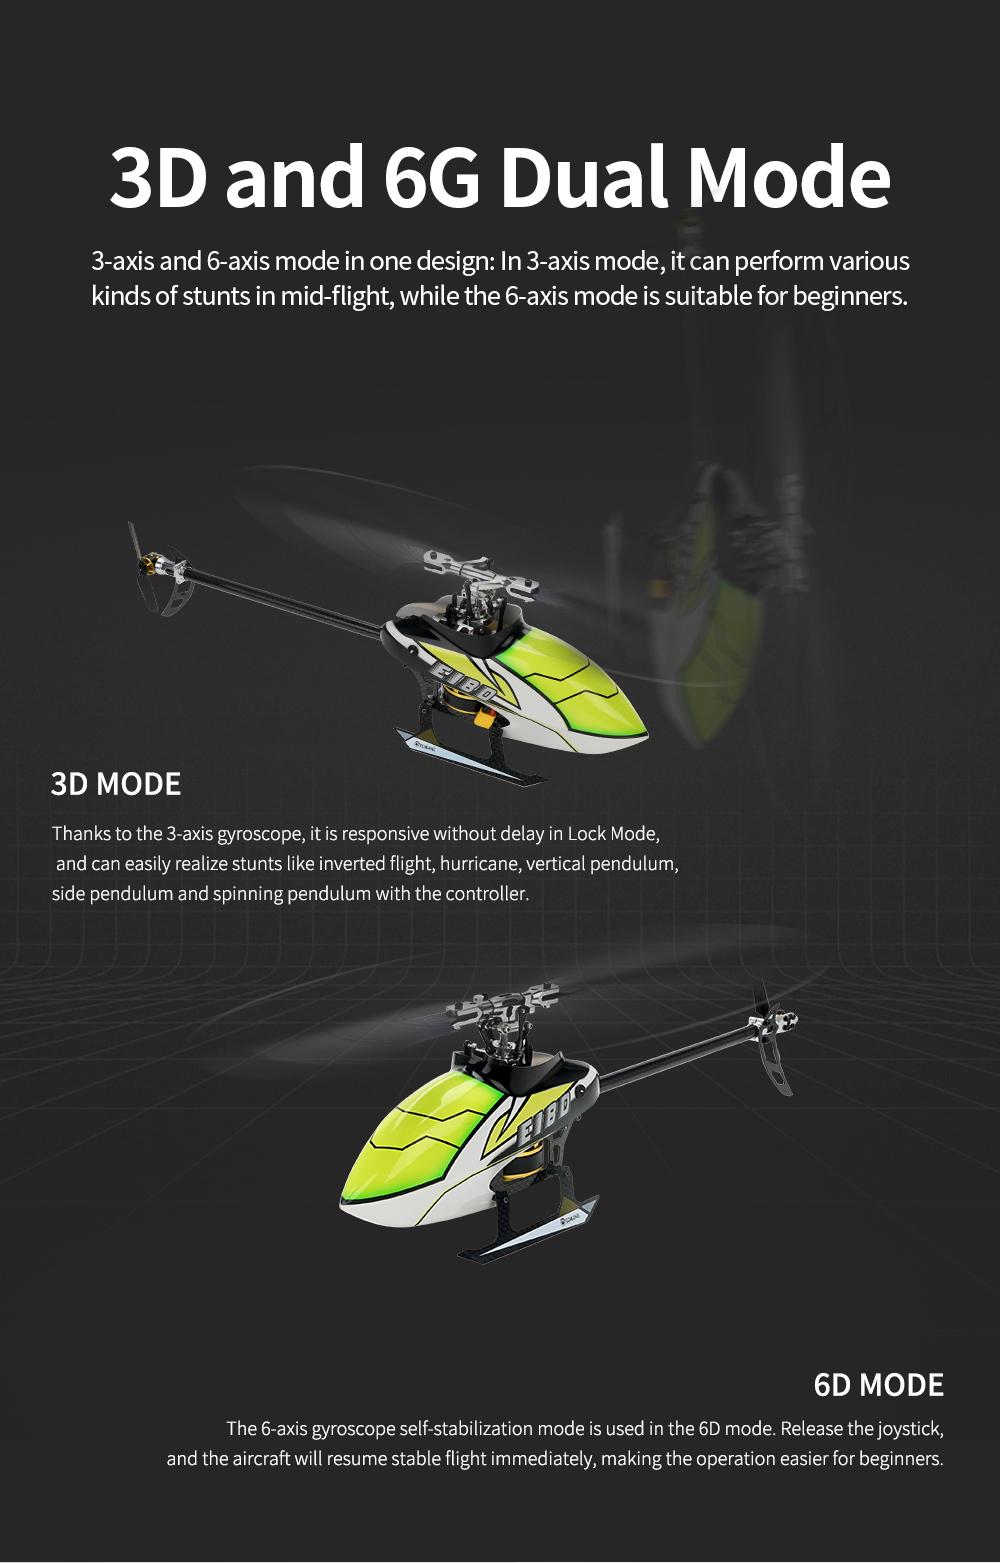 Eachine E180 Bnf: Eachine E180 BNF: Compact, Durable, and Easy to Fly